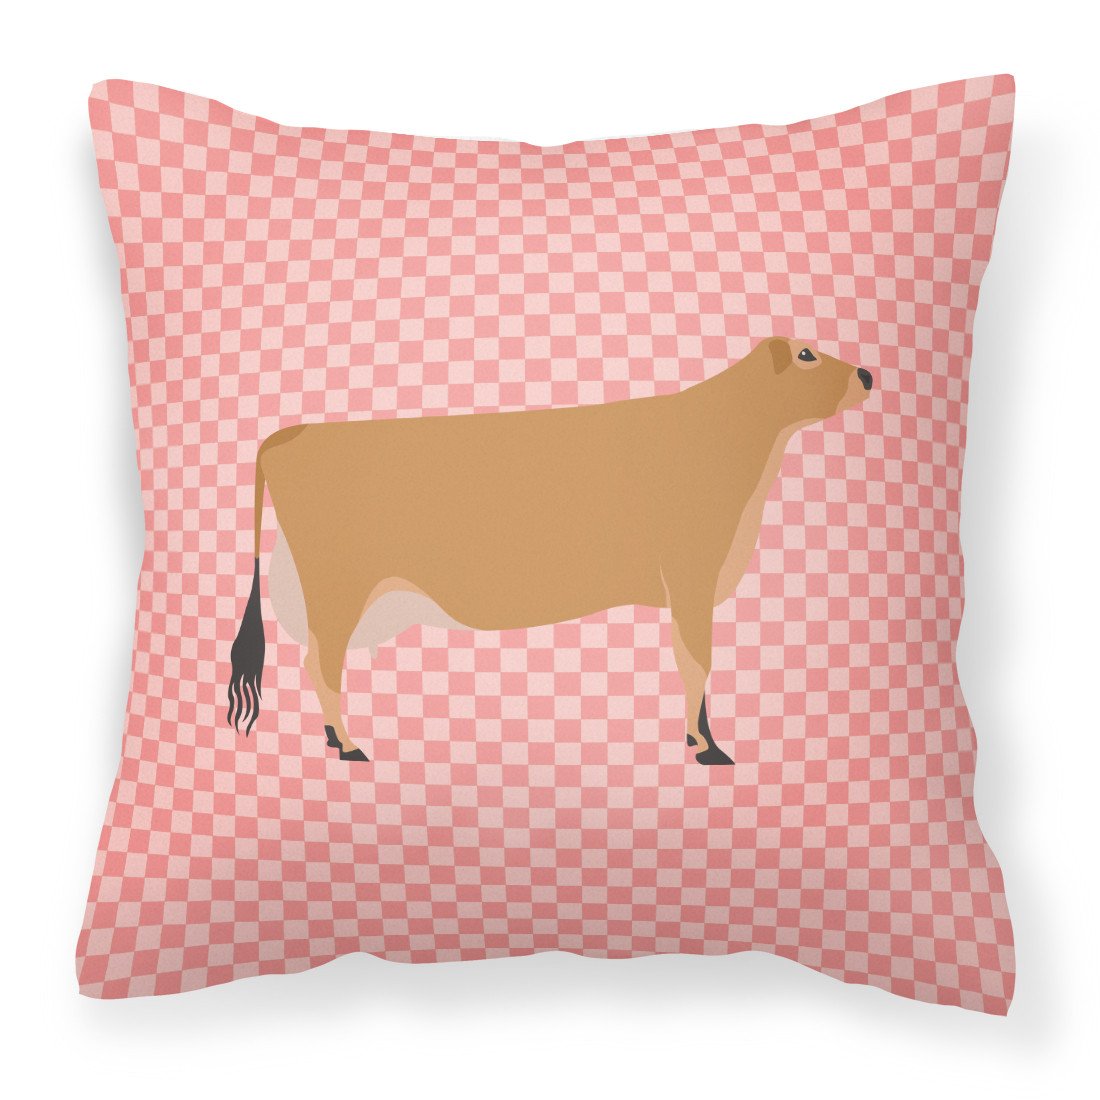 Jersey Cow Pink Check Fabric Decorative Pillow BB7829PW1818 by Caroline's Treasures